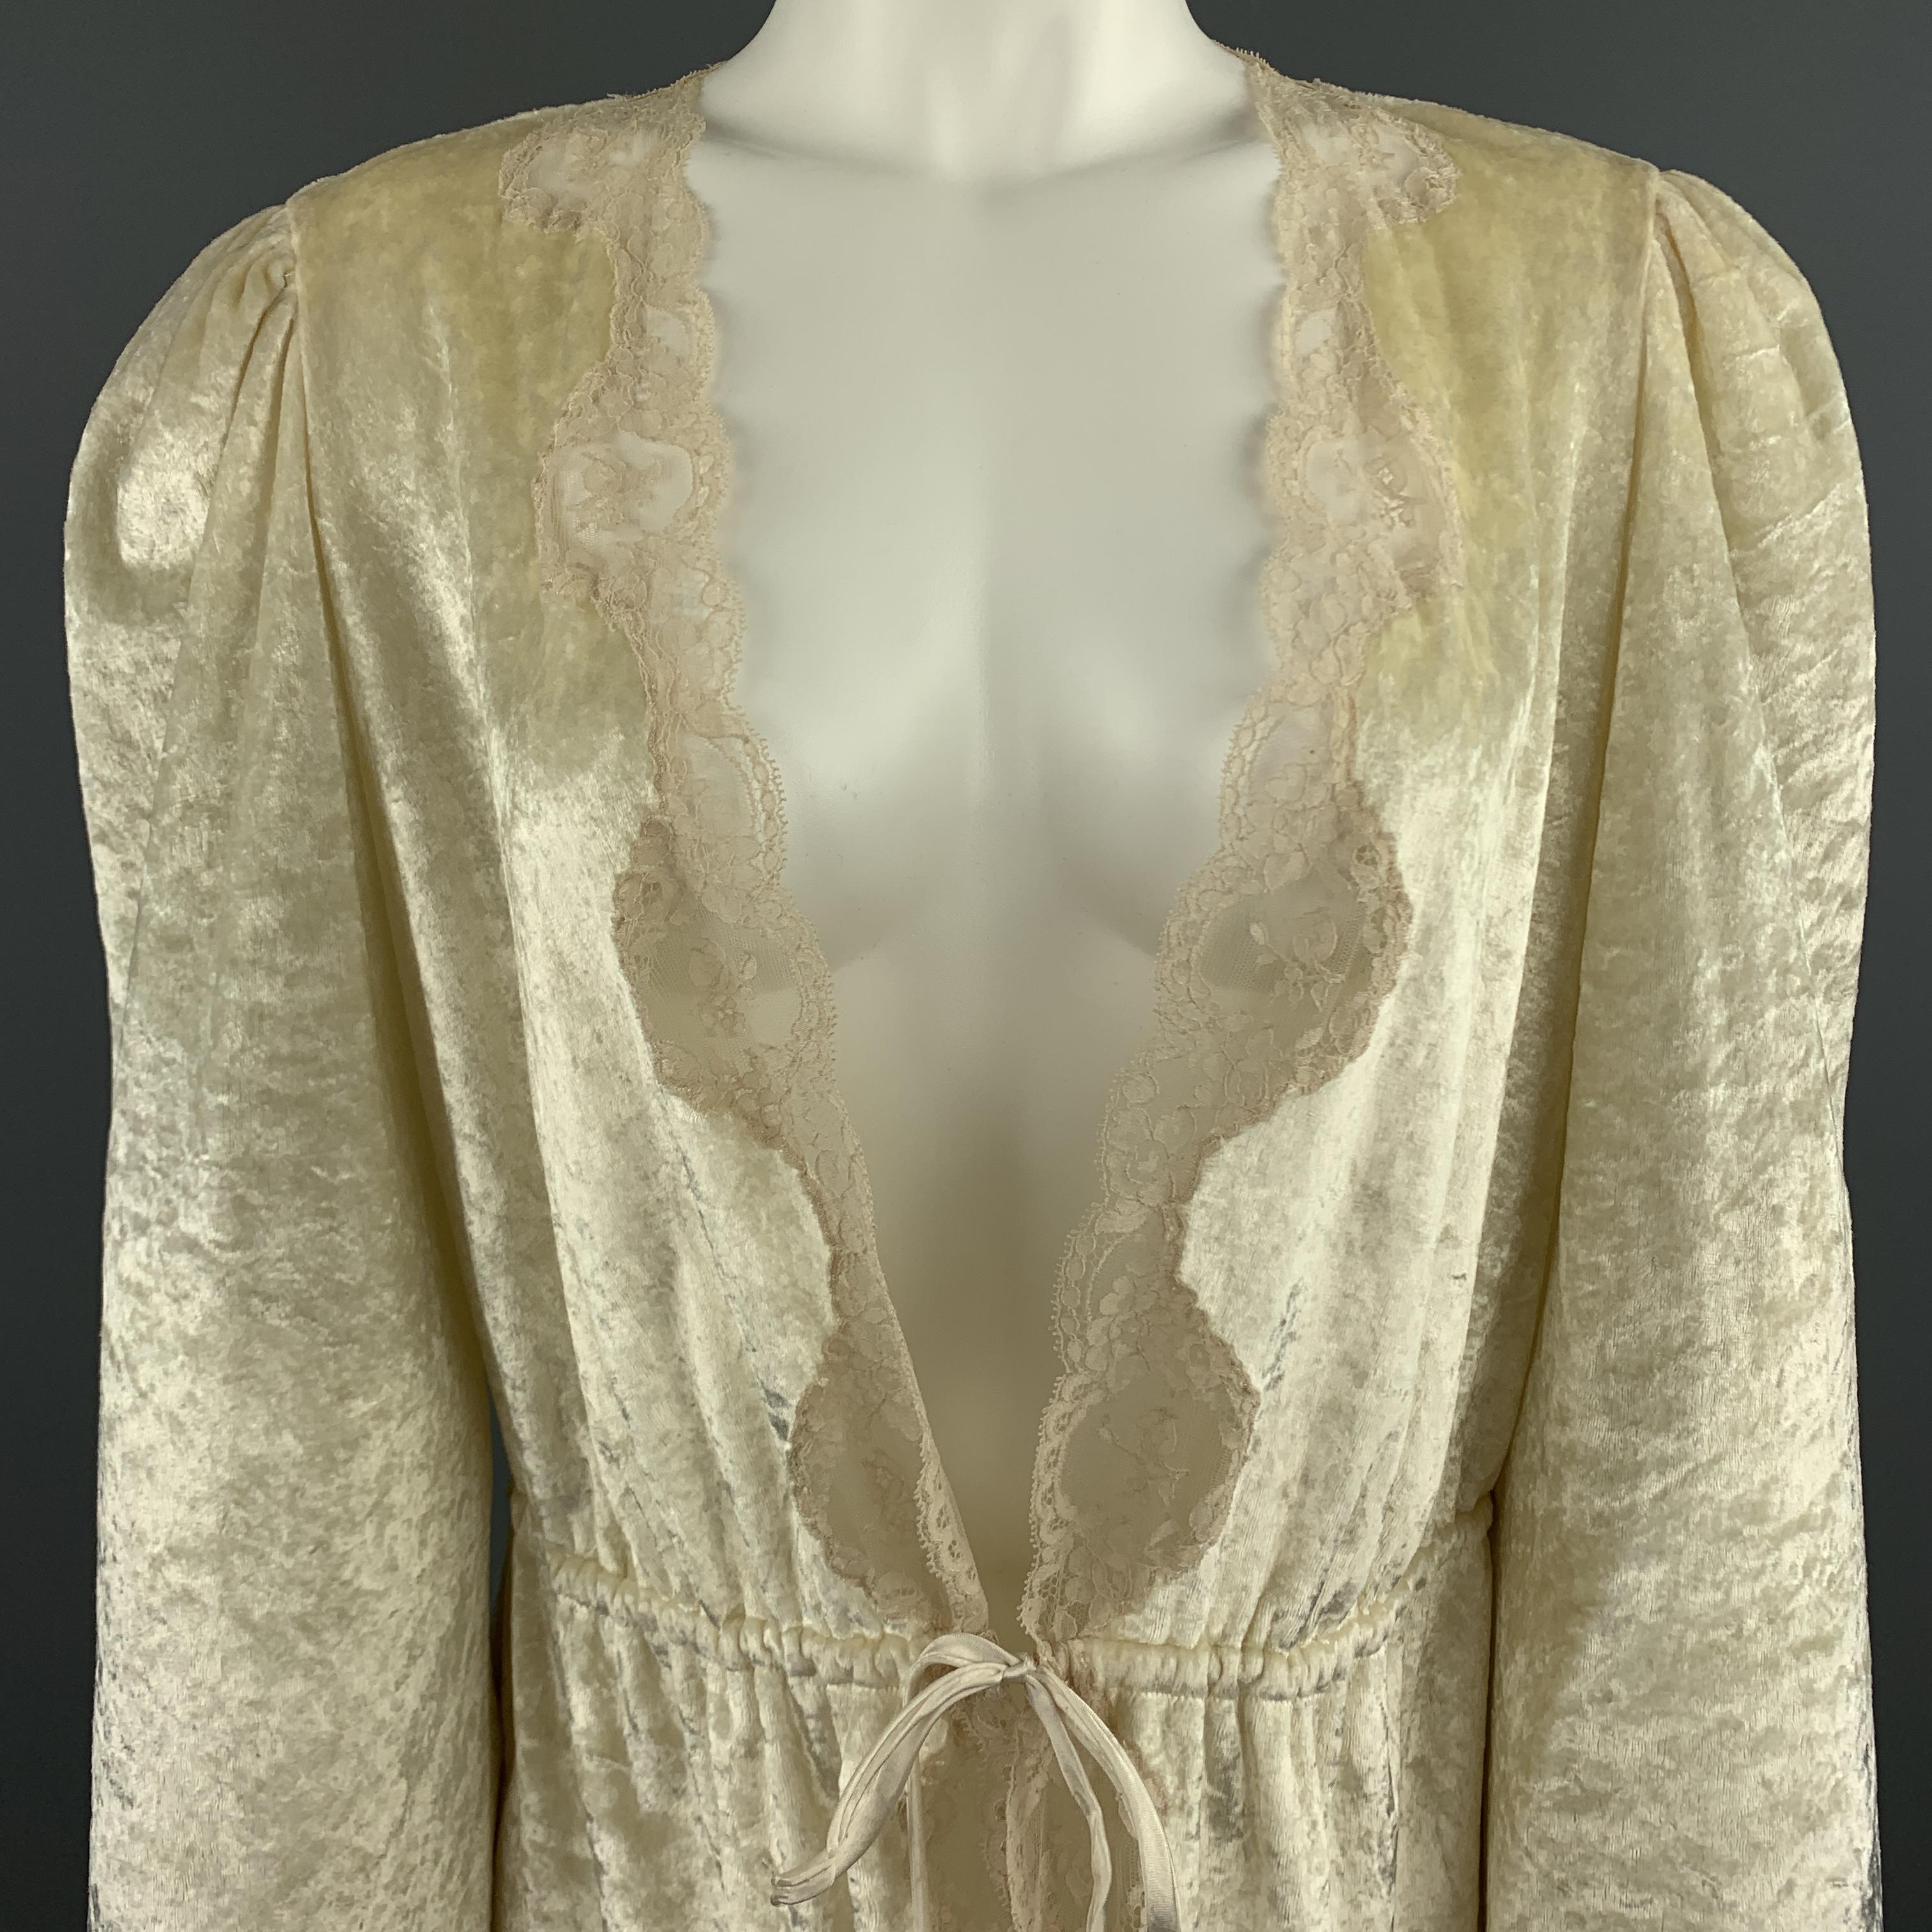 Vintage CHRISTIAN DIOR LINGERIE for I.MAGNIN robe top comes in cream crushed velvet with a deep V neck, drawstring waist tie closure, and beige lace trim. 

Very Good Pre-Owned Condition.
Marked:

Measurements:

Shoulder: 15 in.
Bust: 40 in.
Sleeve: